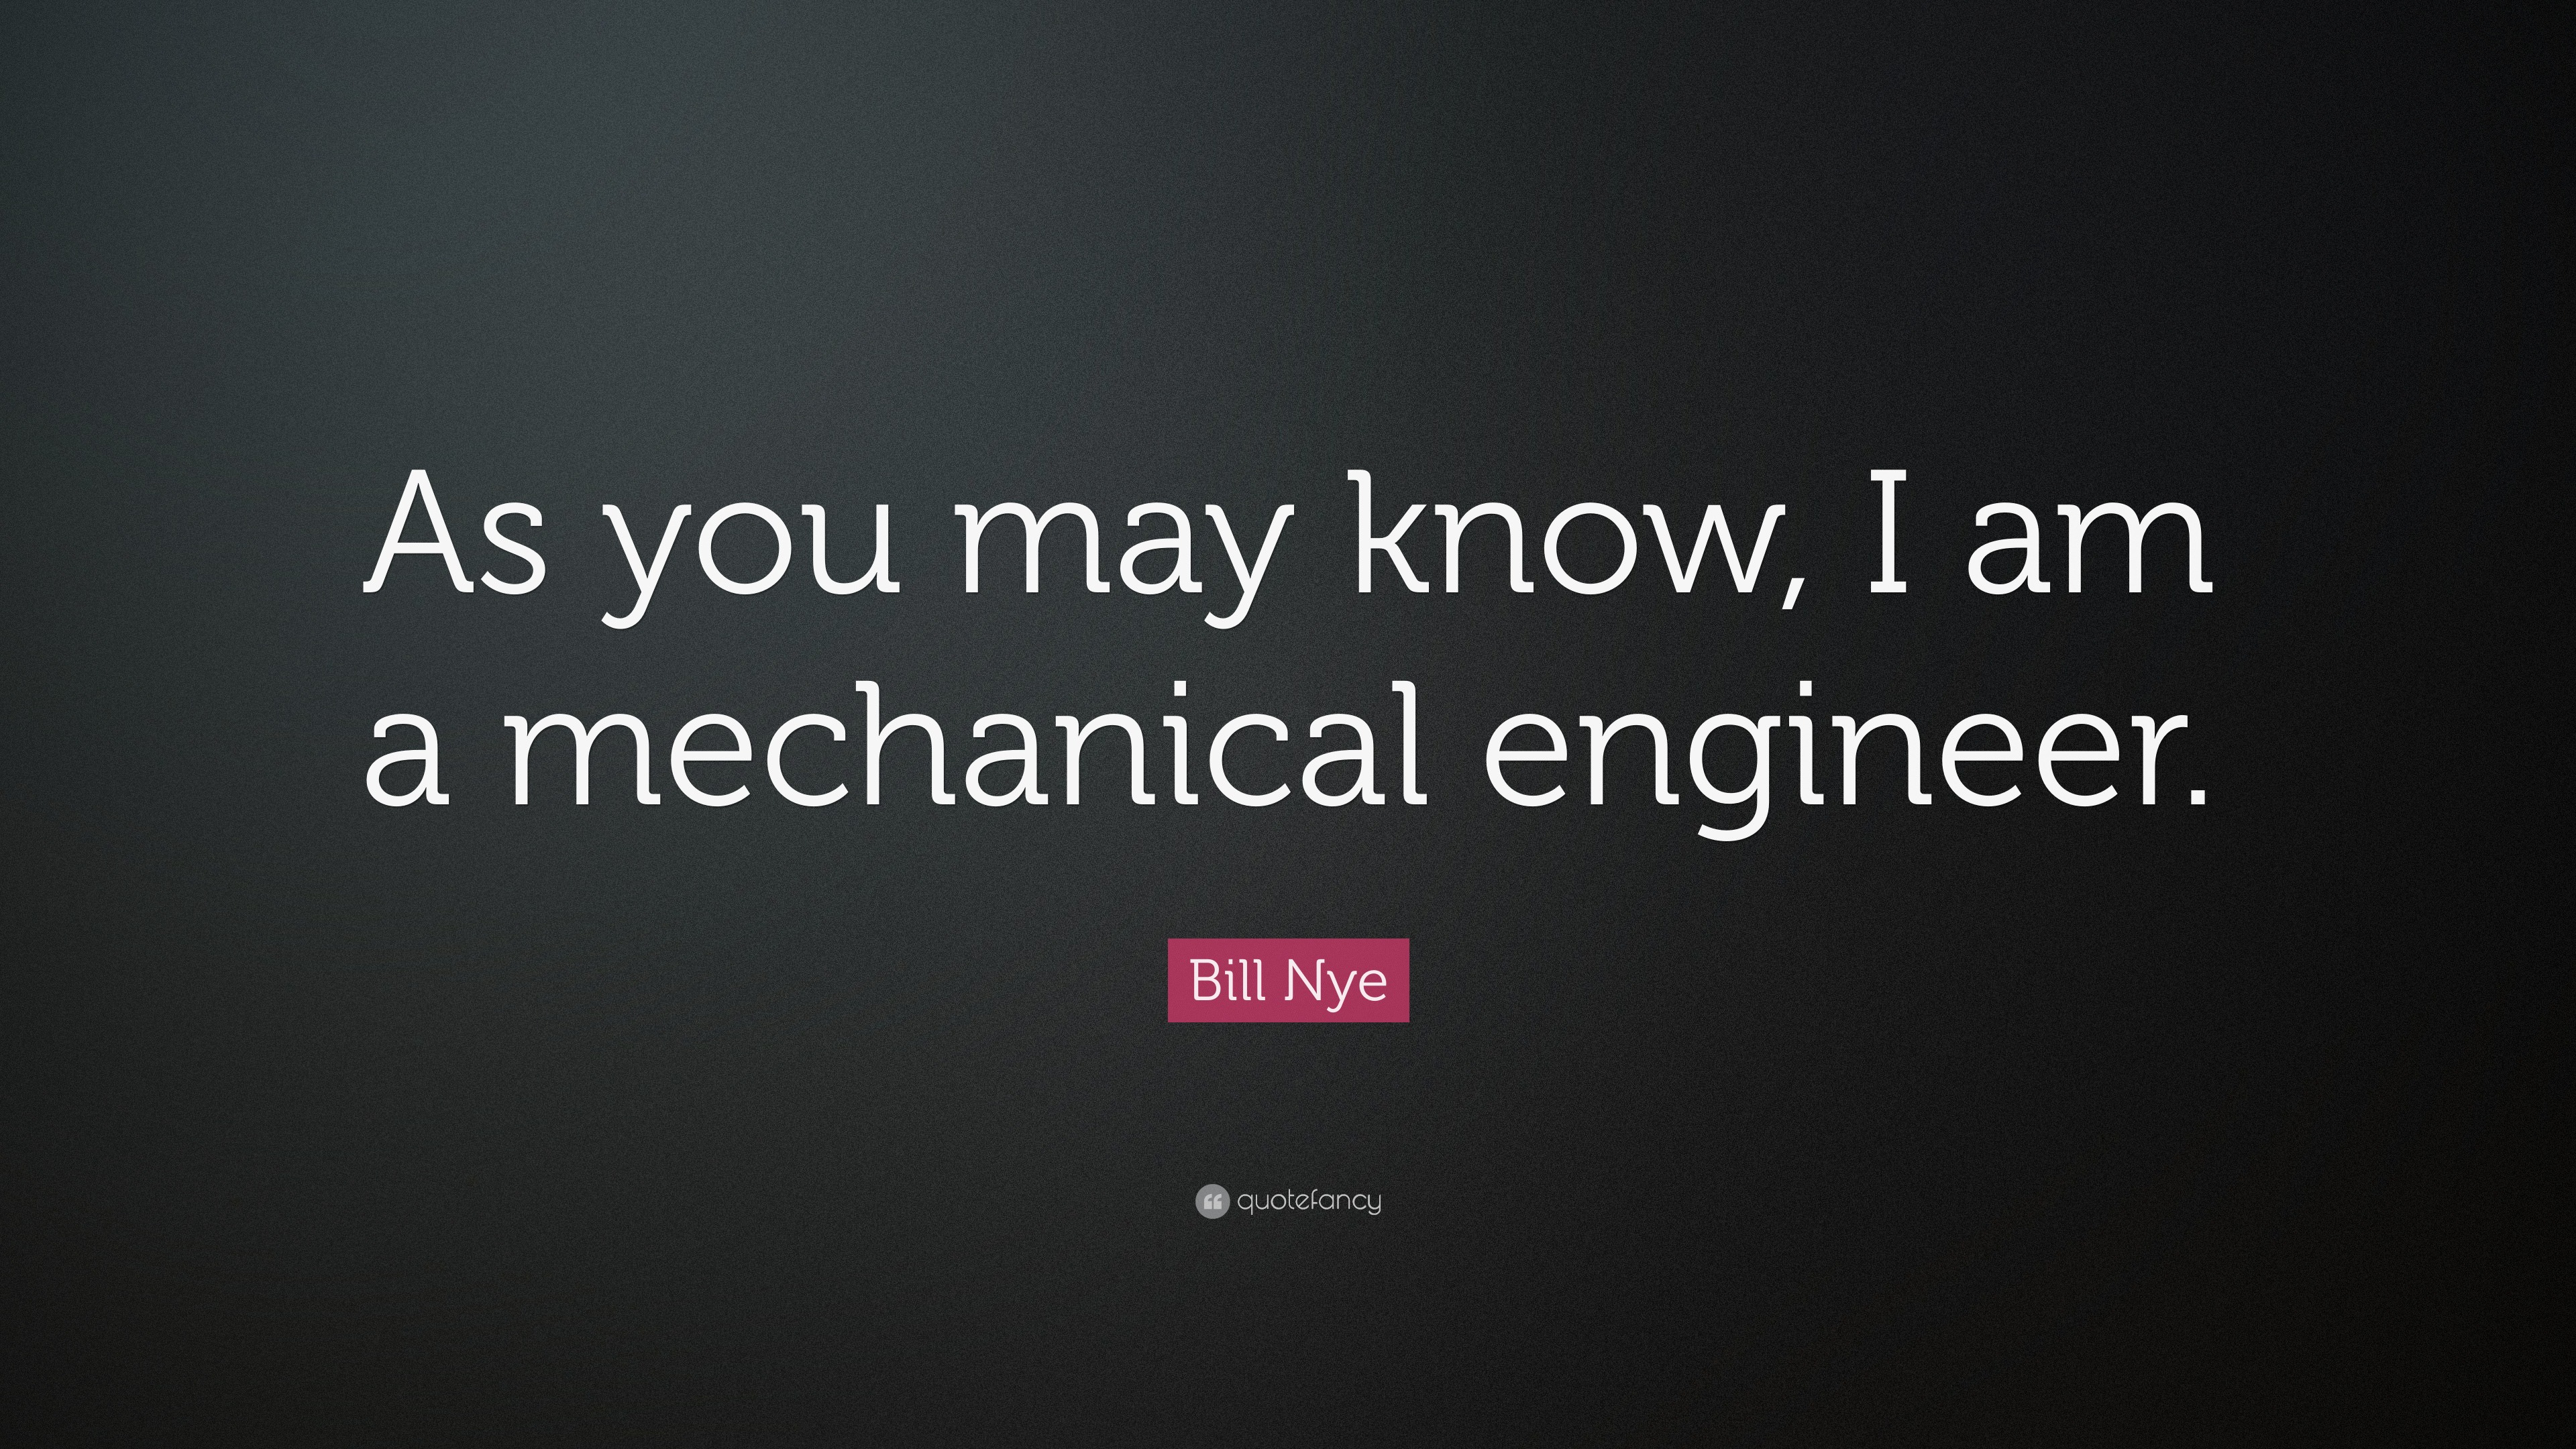 Bill Nye Quote: “As You May Know, I Am A Mechanical Engineer.”